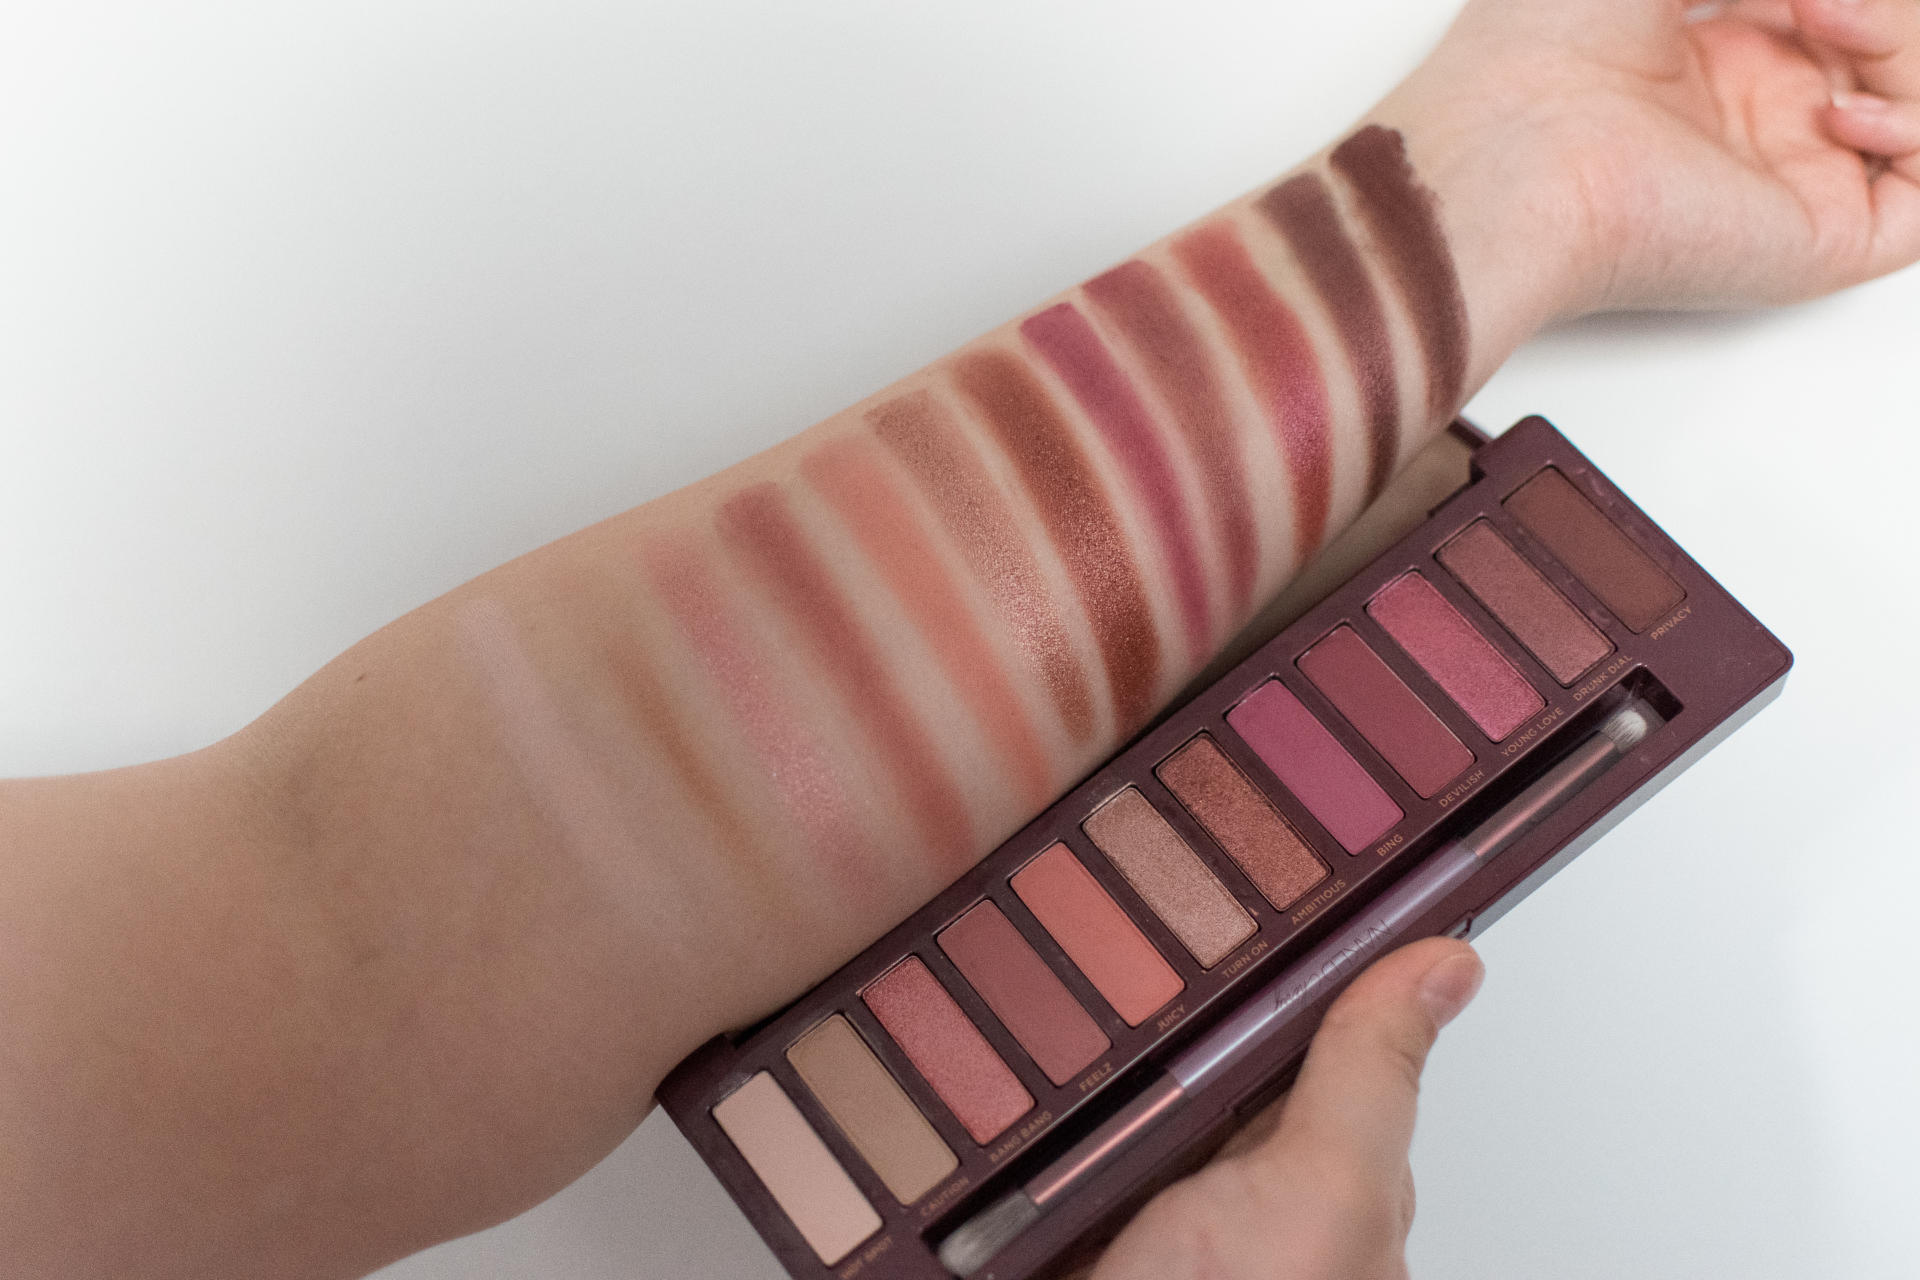 Urban Decay Naked Cherry Palette Swatched